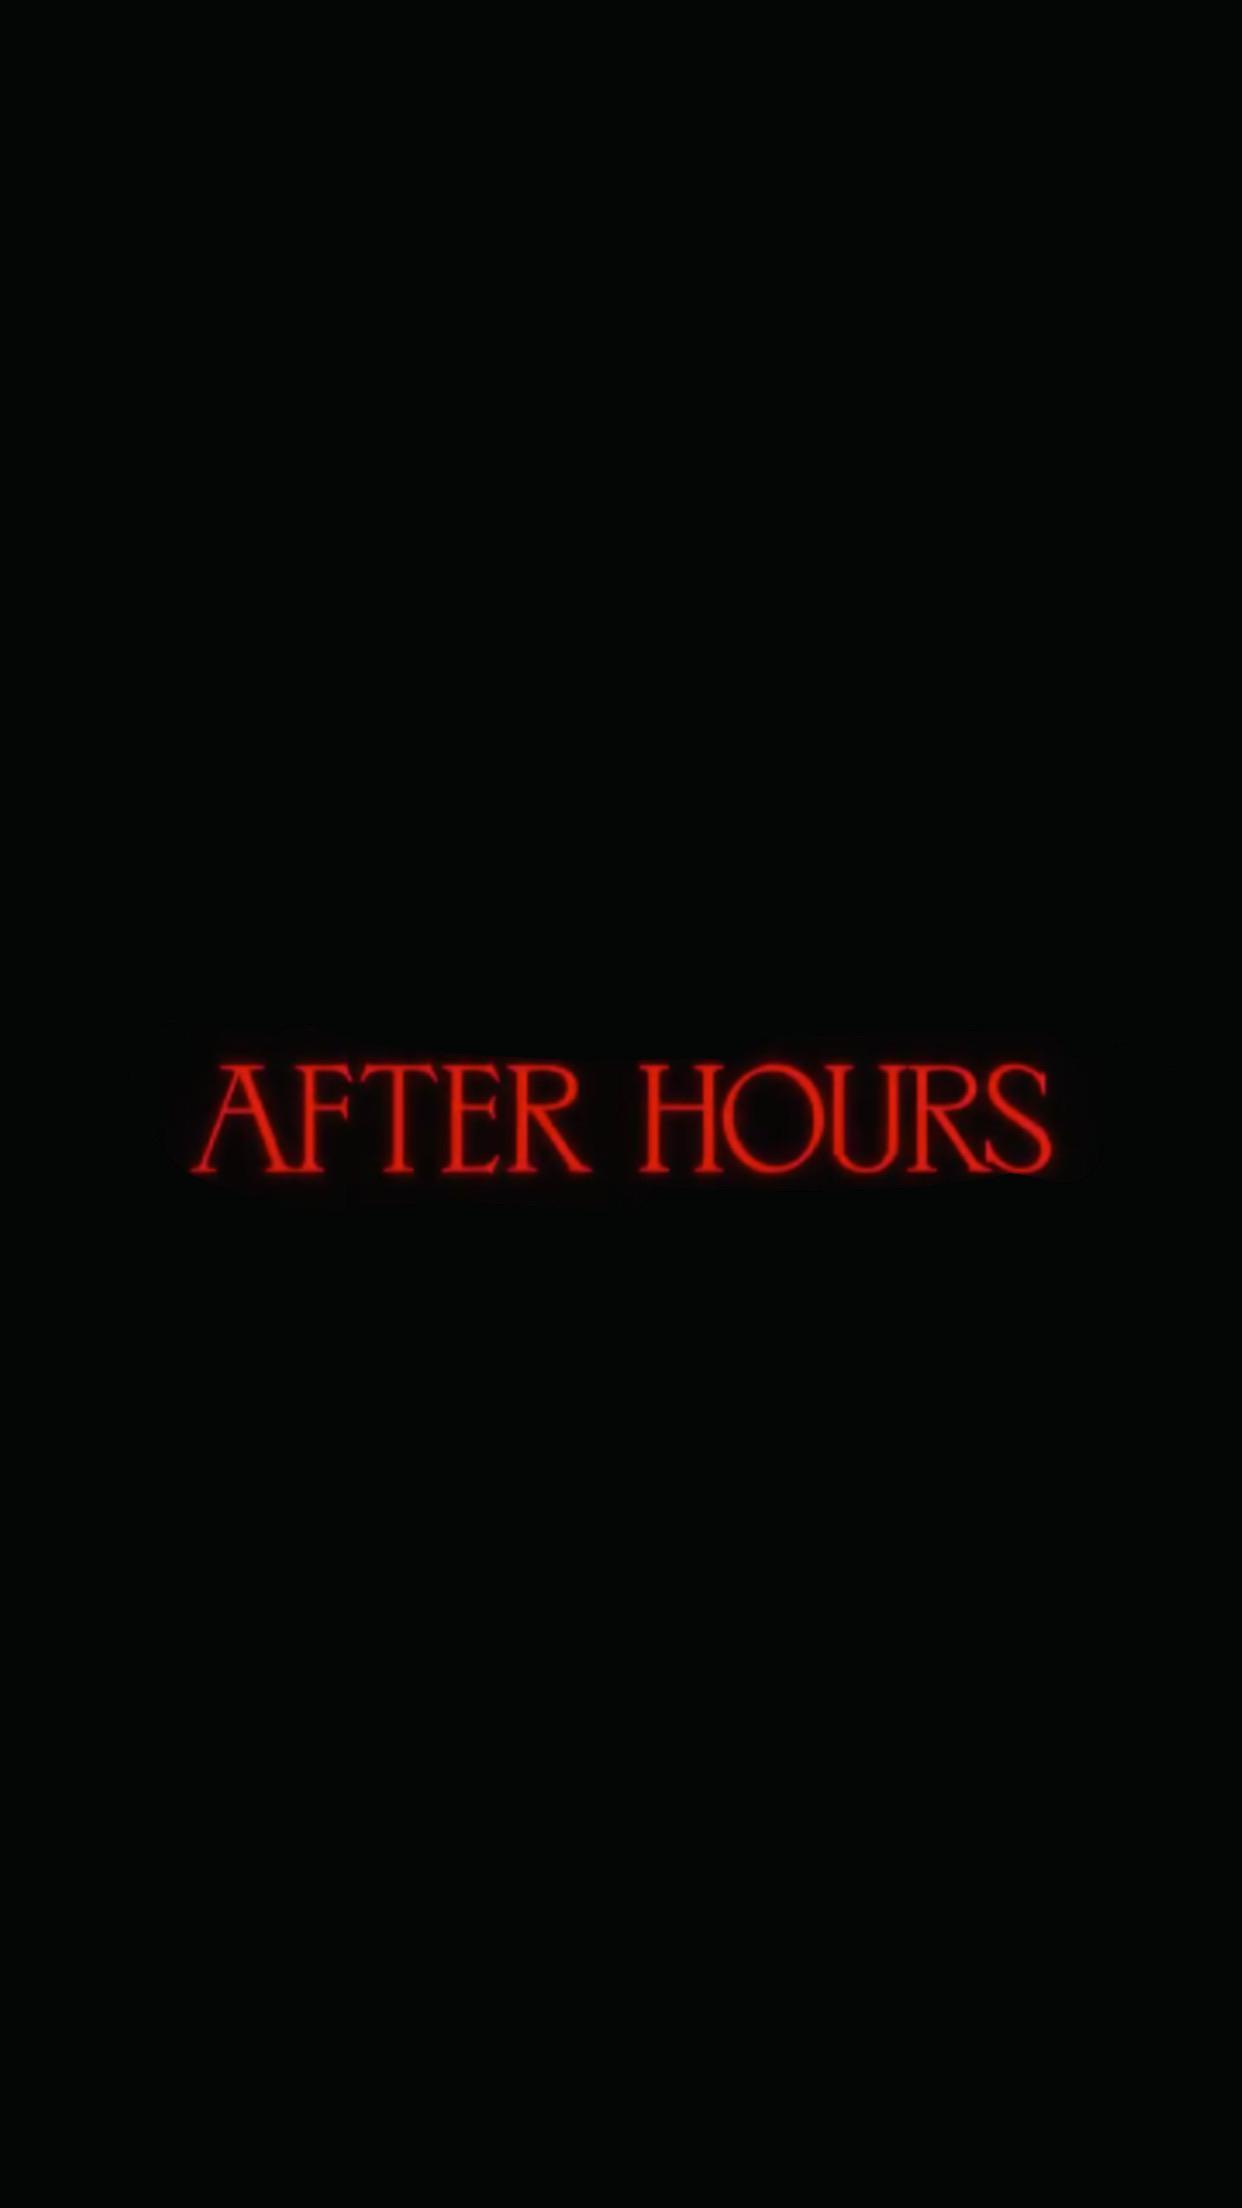 AFTER HOURS wallpaper by ozwastaken  Download on ZEDGE  9735